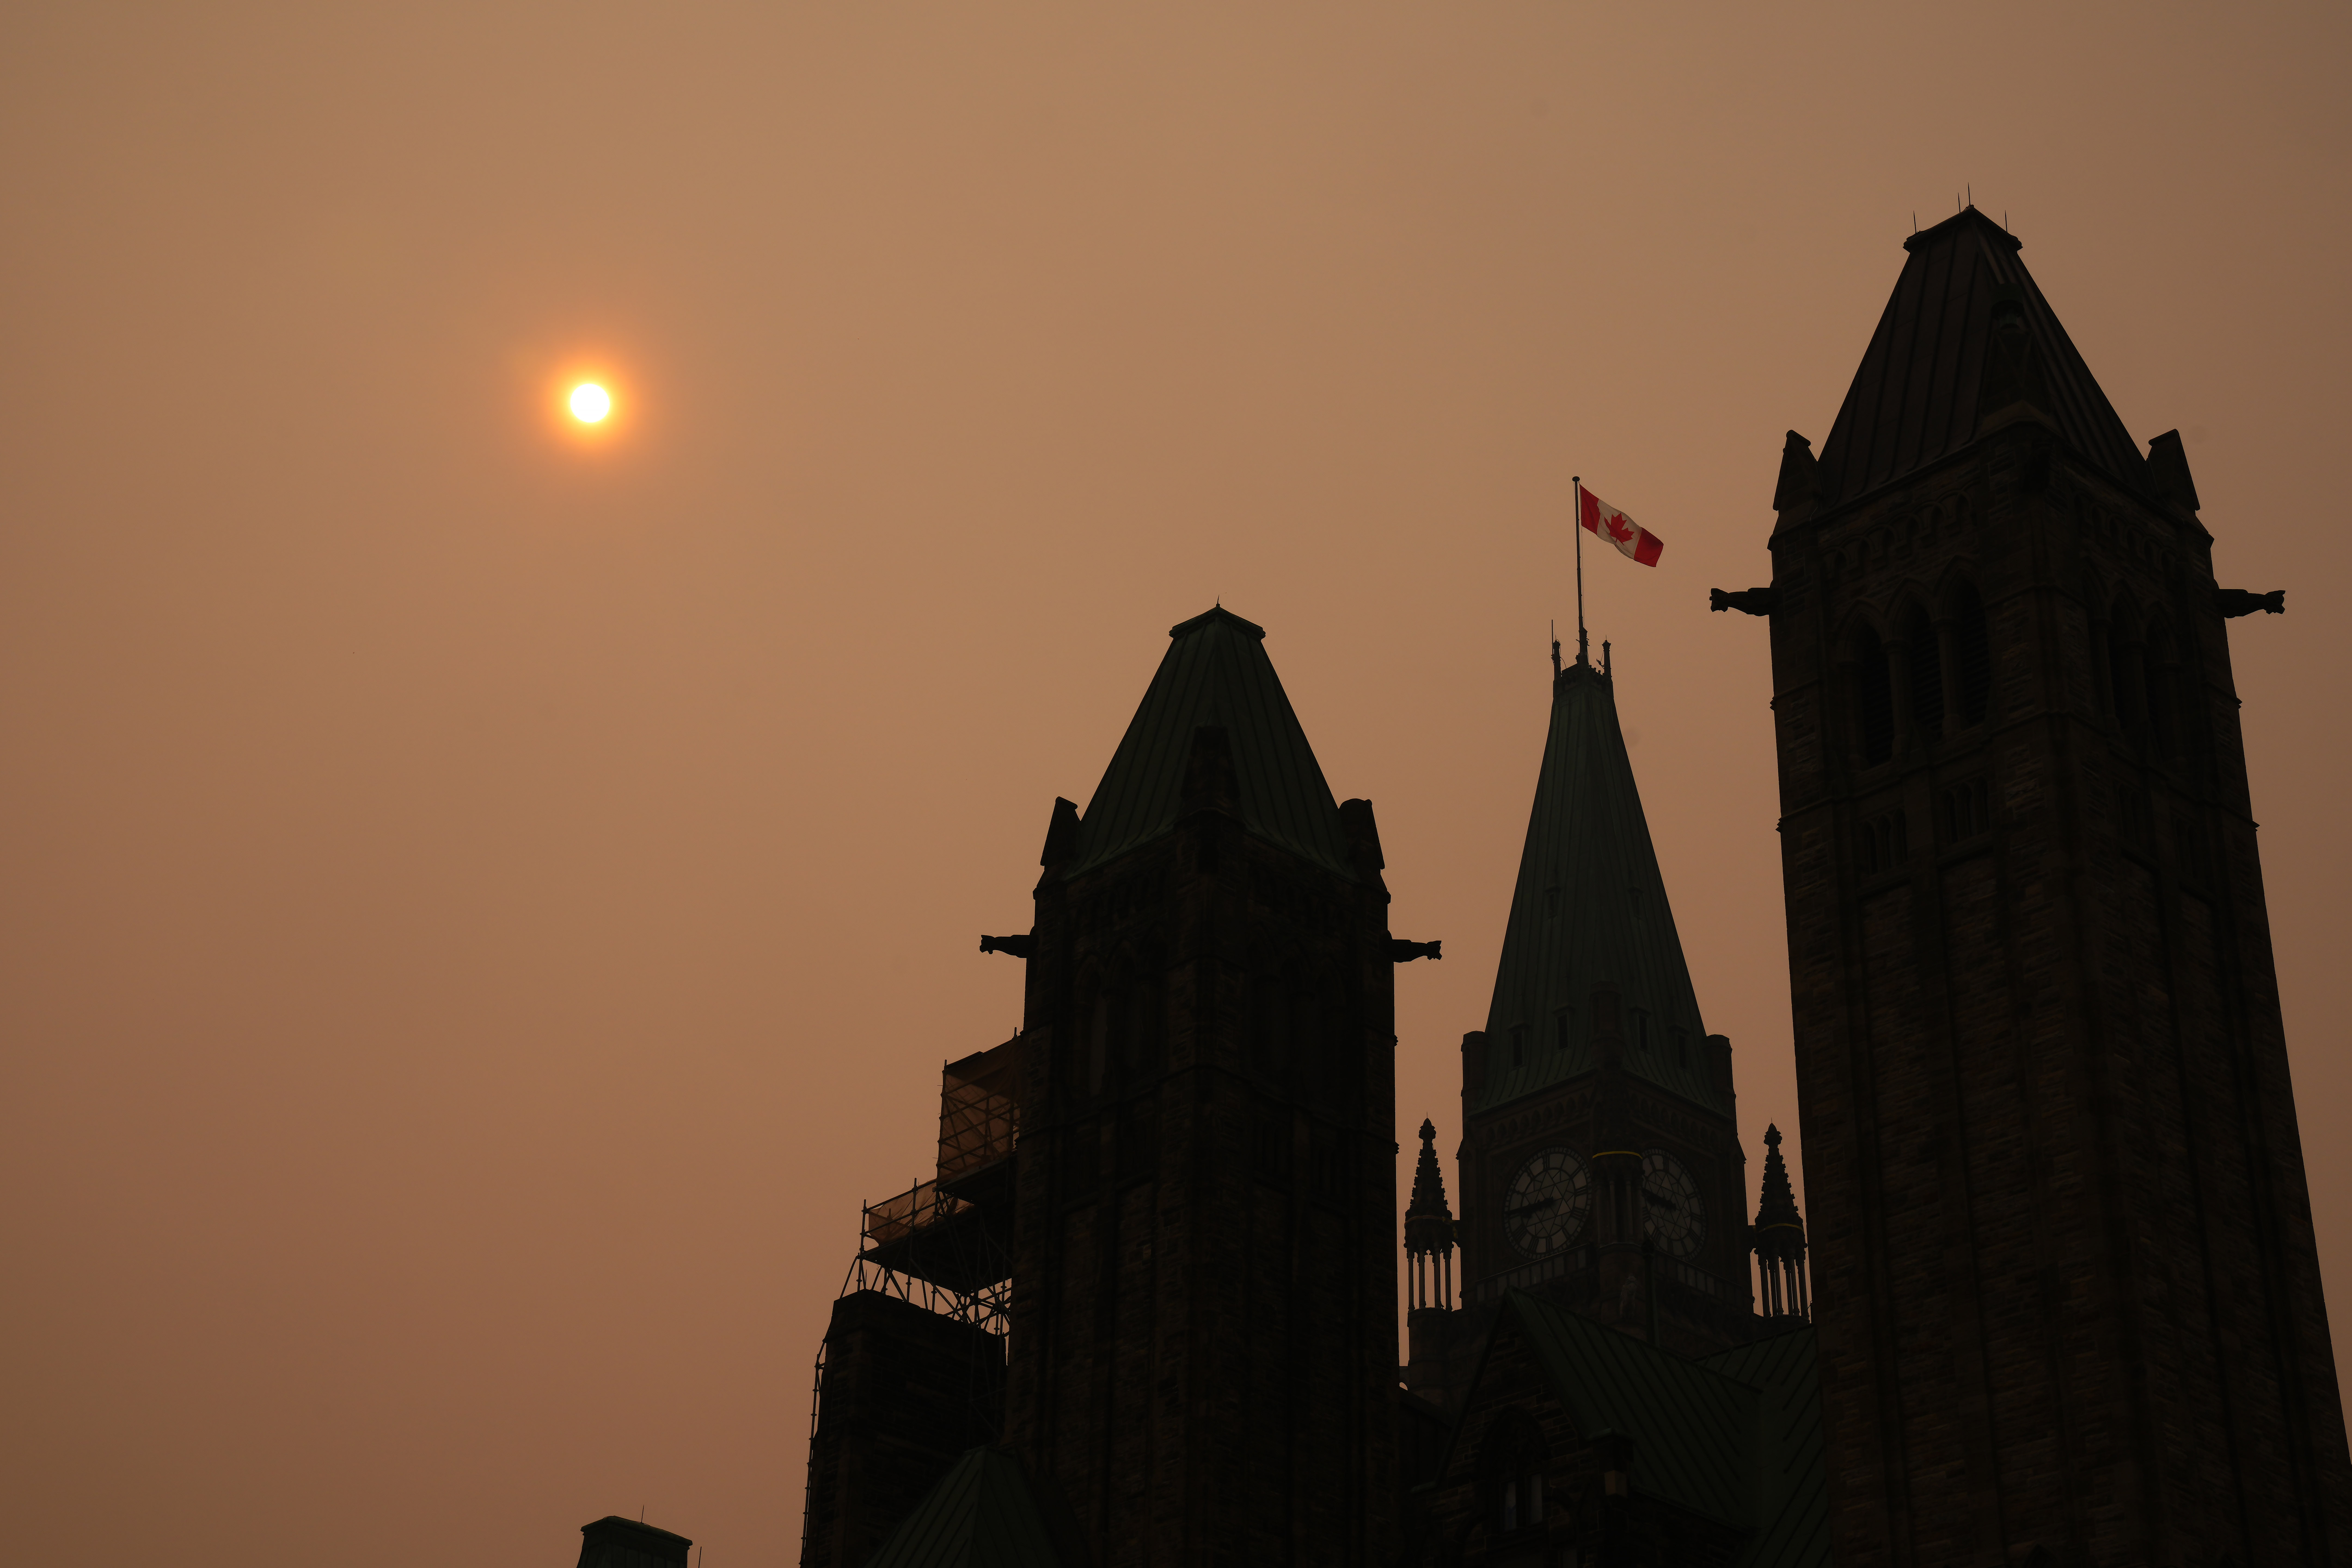 IN PHOTOS: A look at how bad air quality is across North America